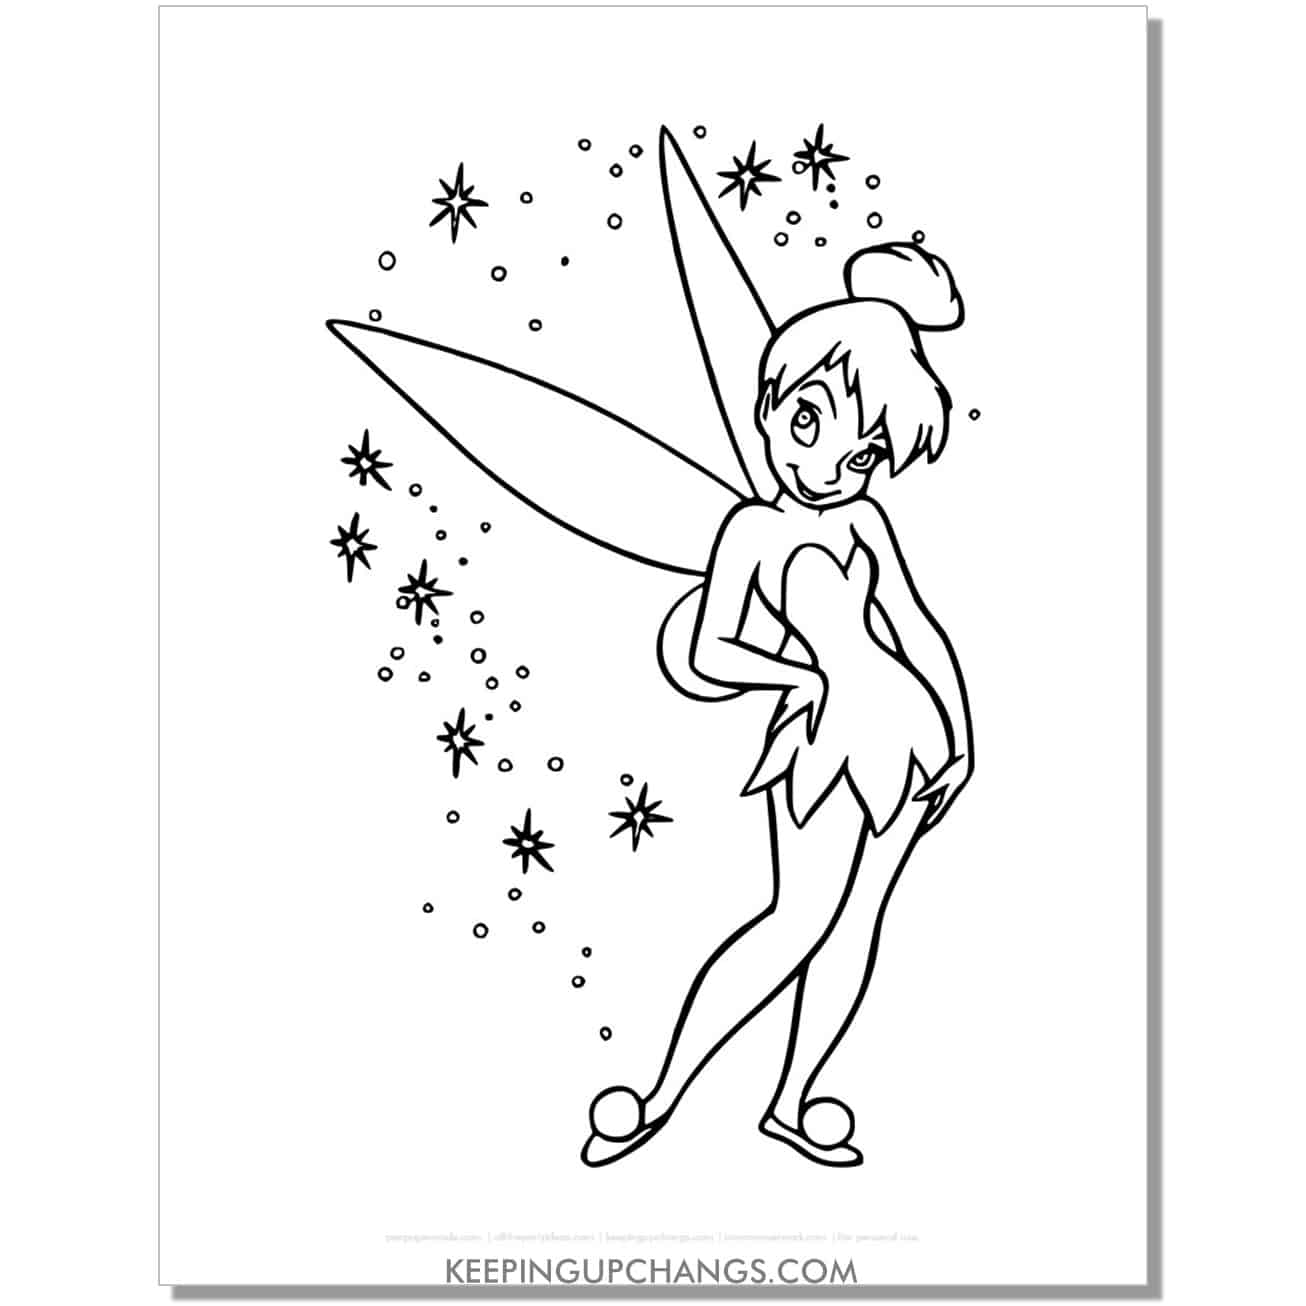 tinkerbell standing forward coloring page, sheet.